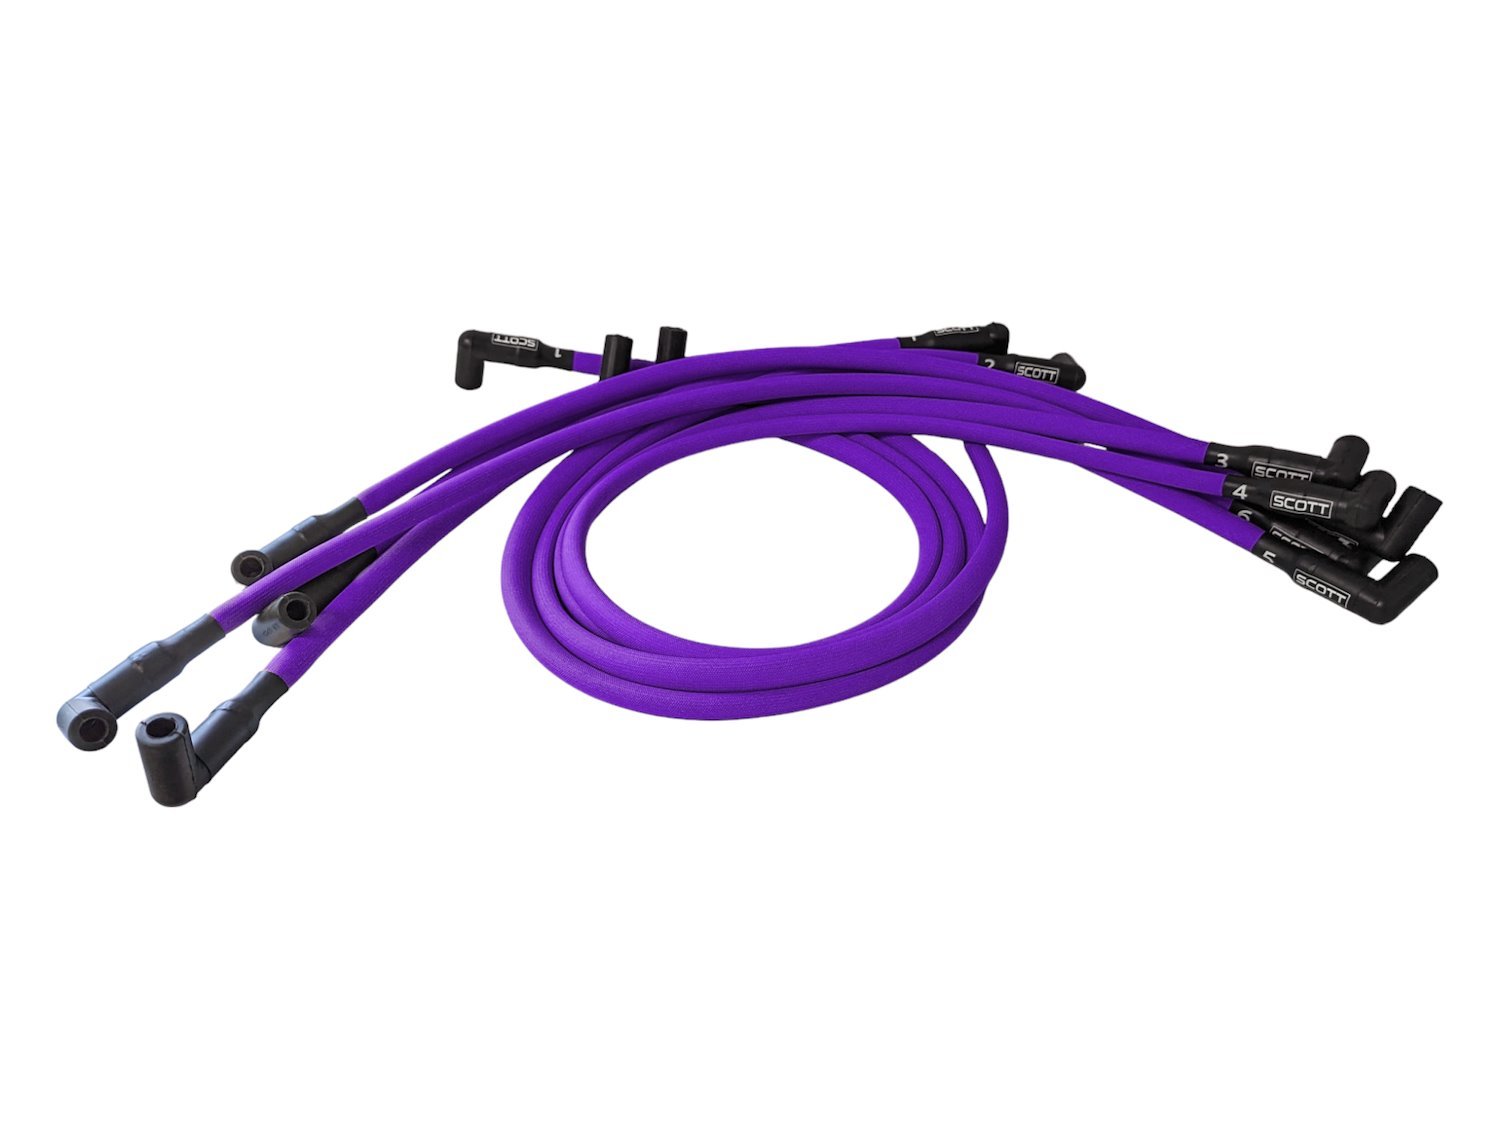 SPW300-PS-516-7 Super Mag Fiberglass-Oversleeved Spark Plug Wire Set for Big Block Chevy Dragster, Under Header [Purple]